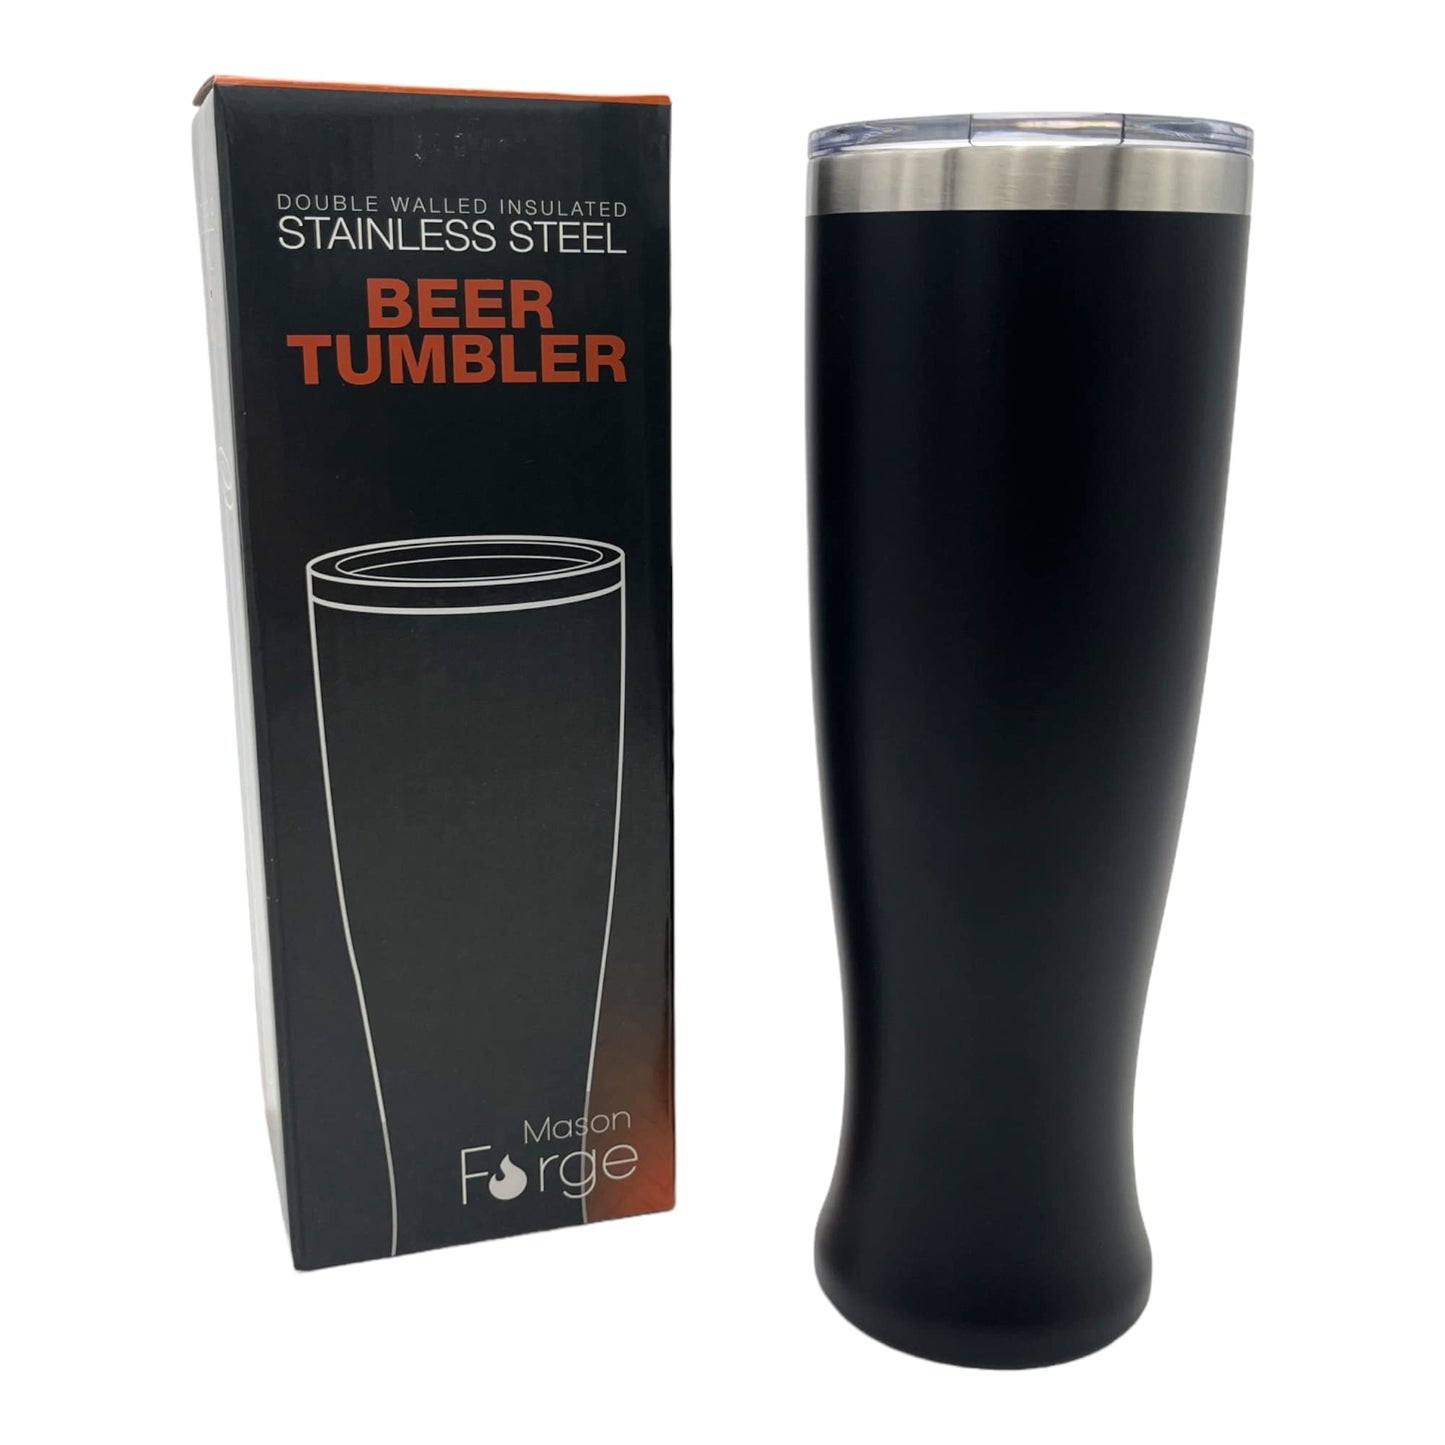 Mason Forge, Stainless Steel Insulated Beer Tumbler